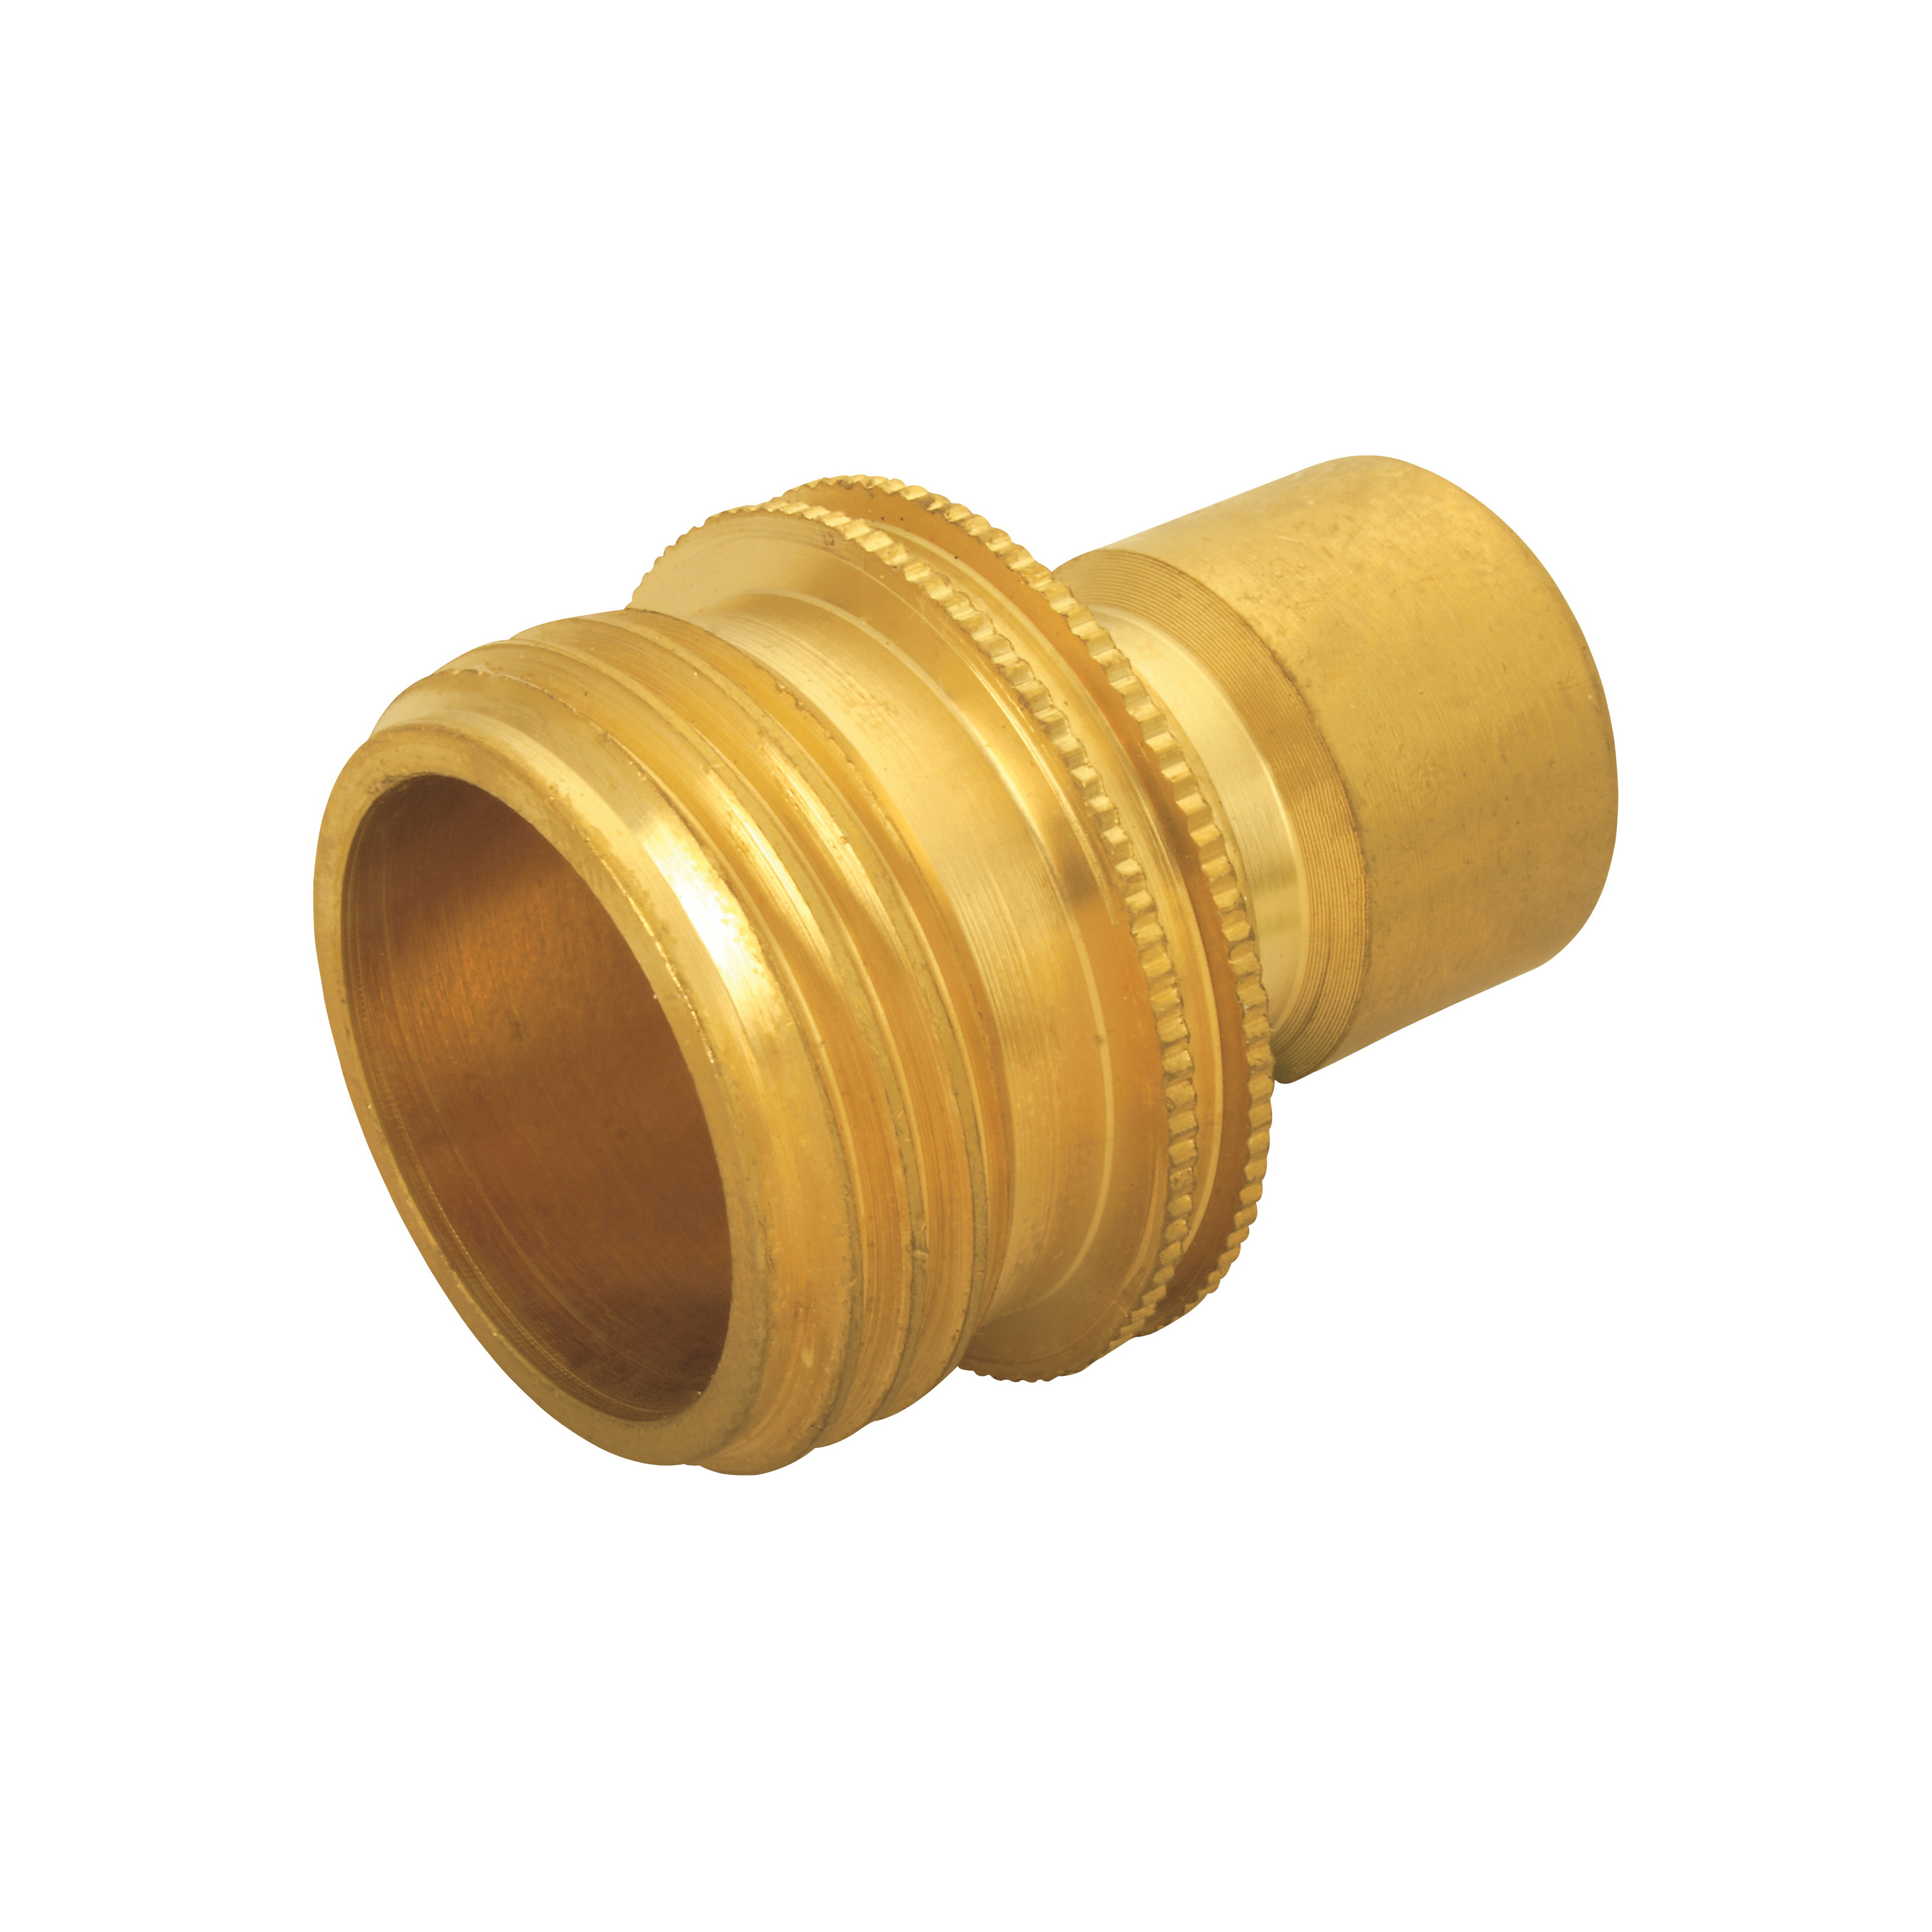 Landscapers Select GB9610 Hose Connector, 3/4 in, Male, Brass, Brass